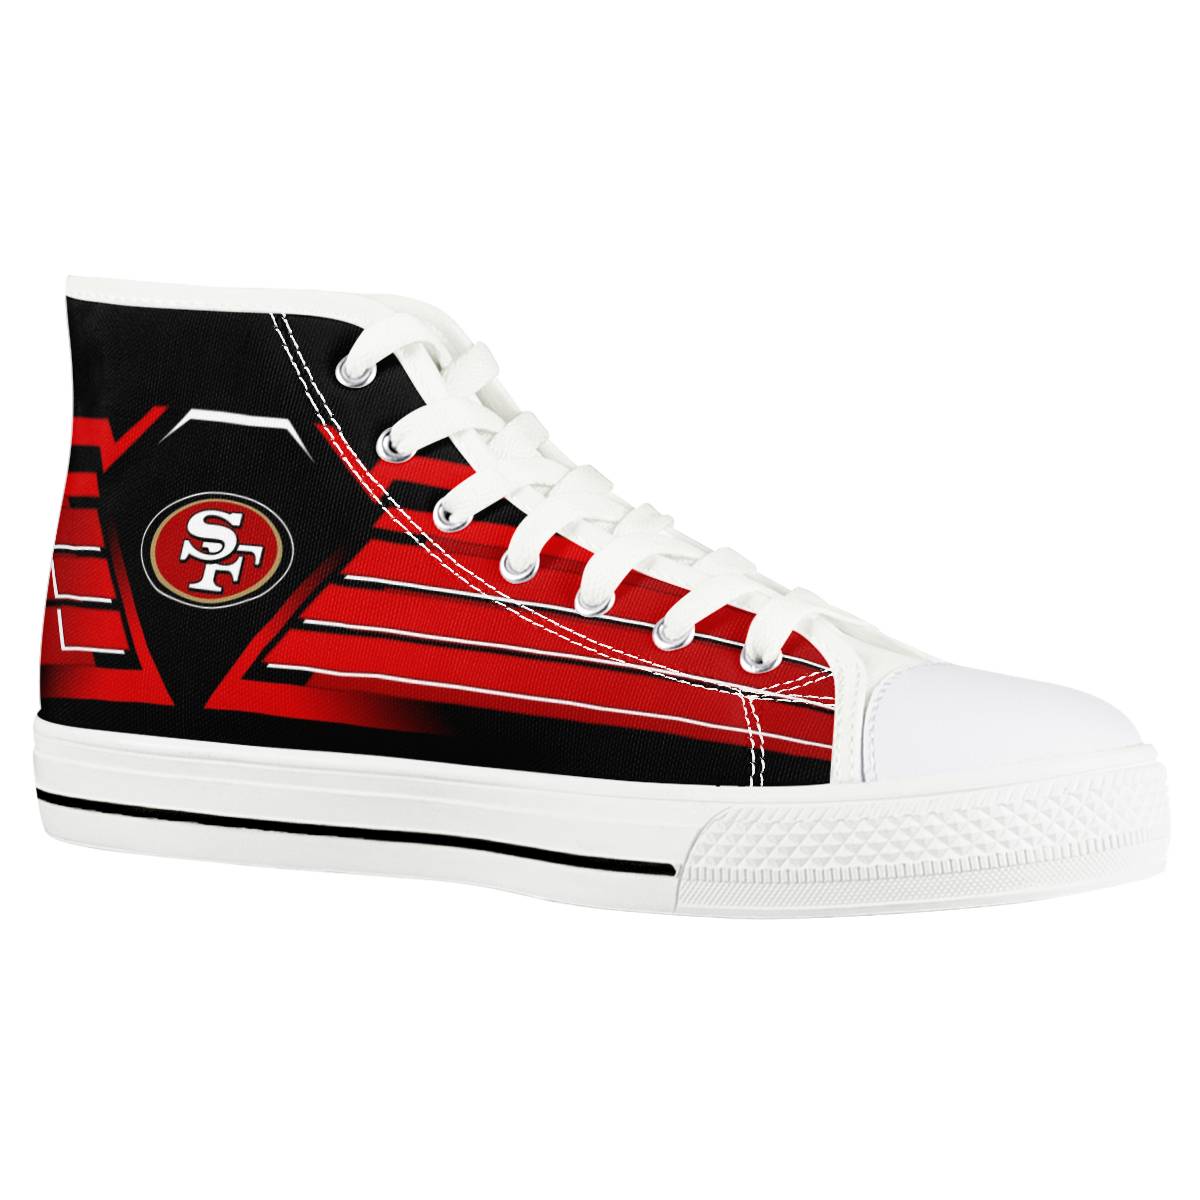 Women's San Francisco 49ers High Top Canvas Sneakers 003